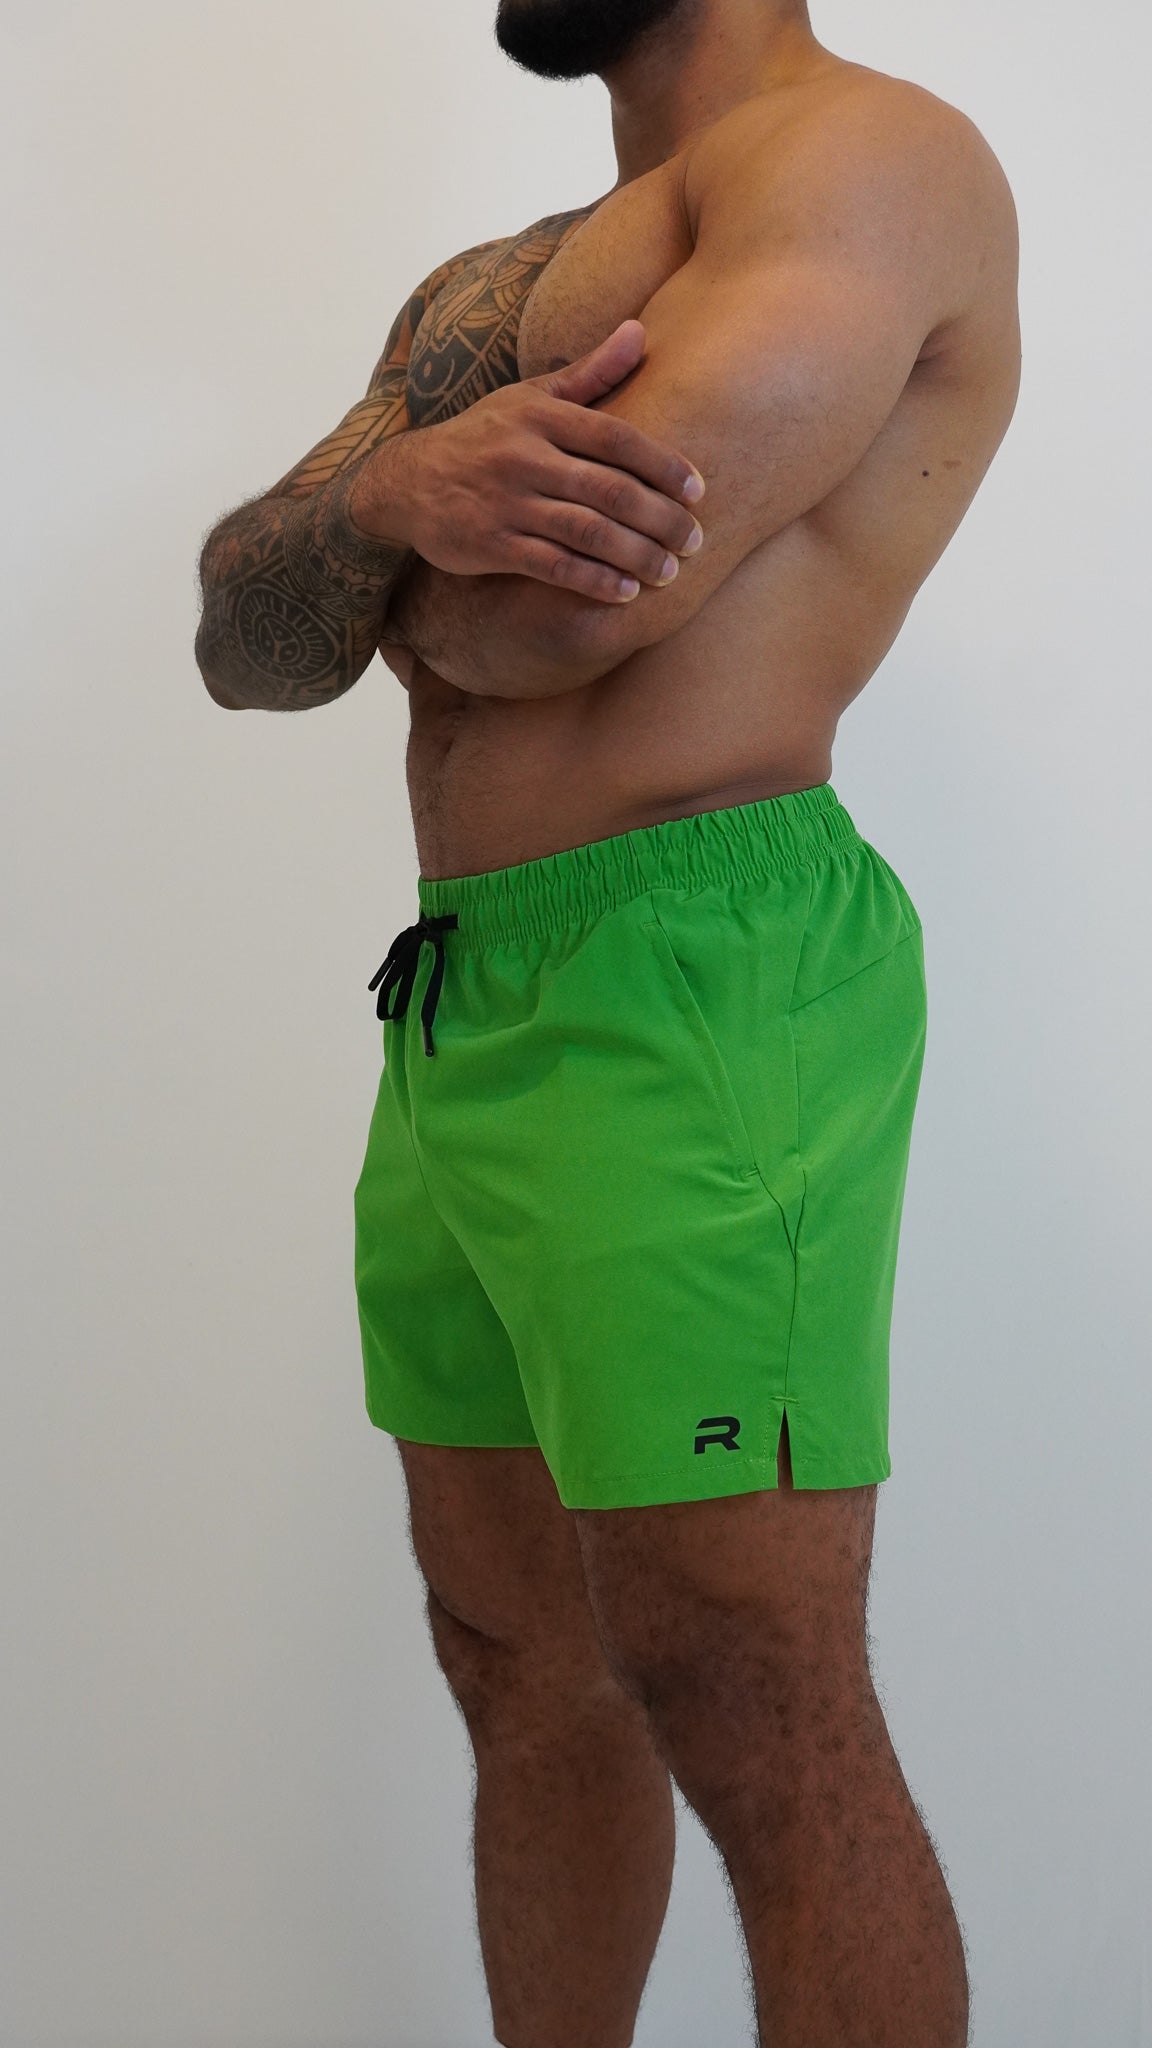 Mid Thigh Shorts 2.0 - Resilient Active